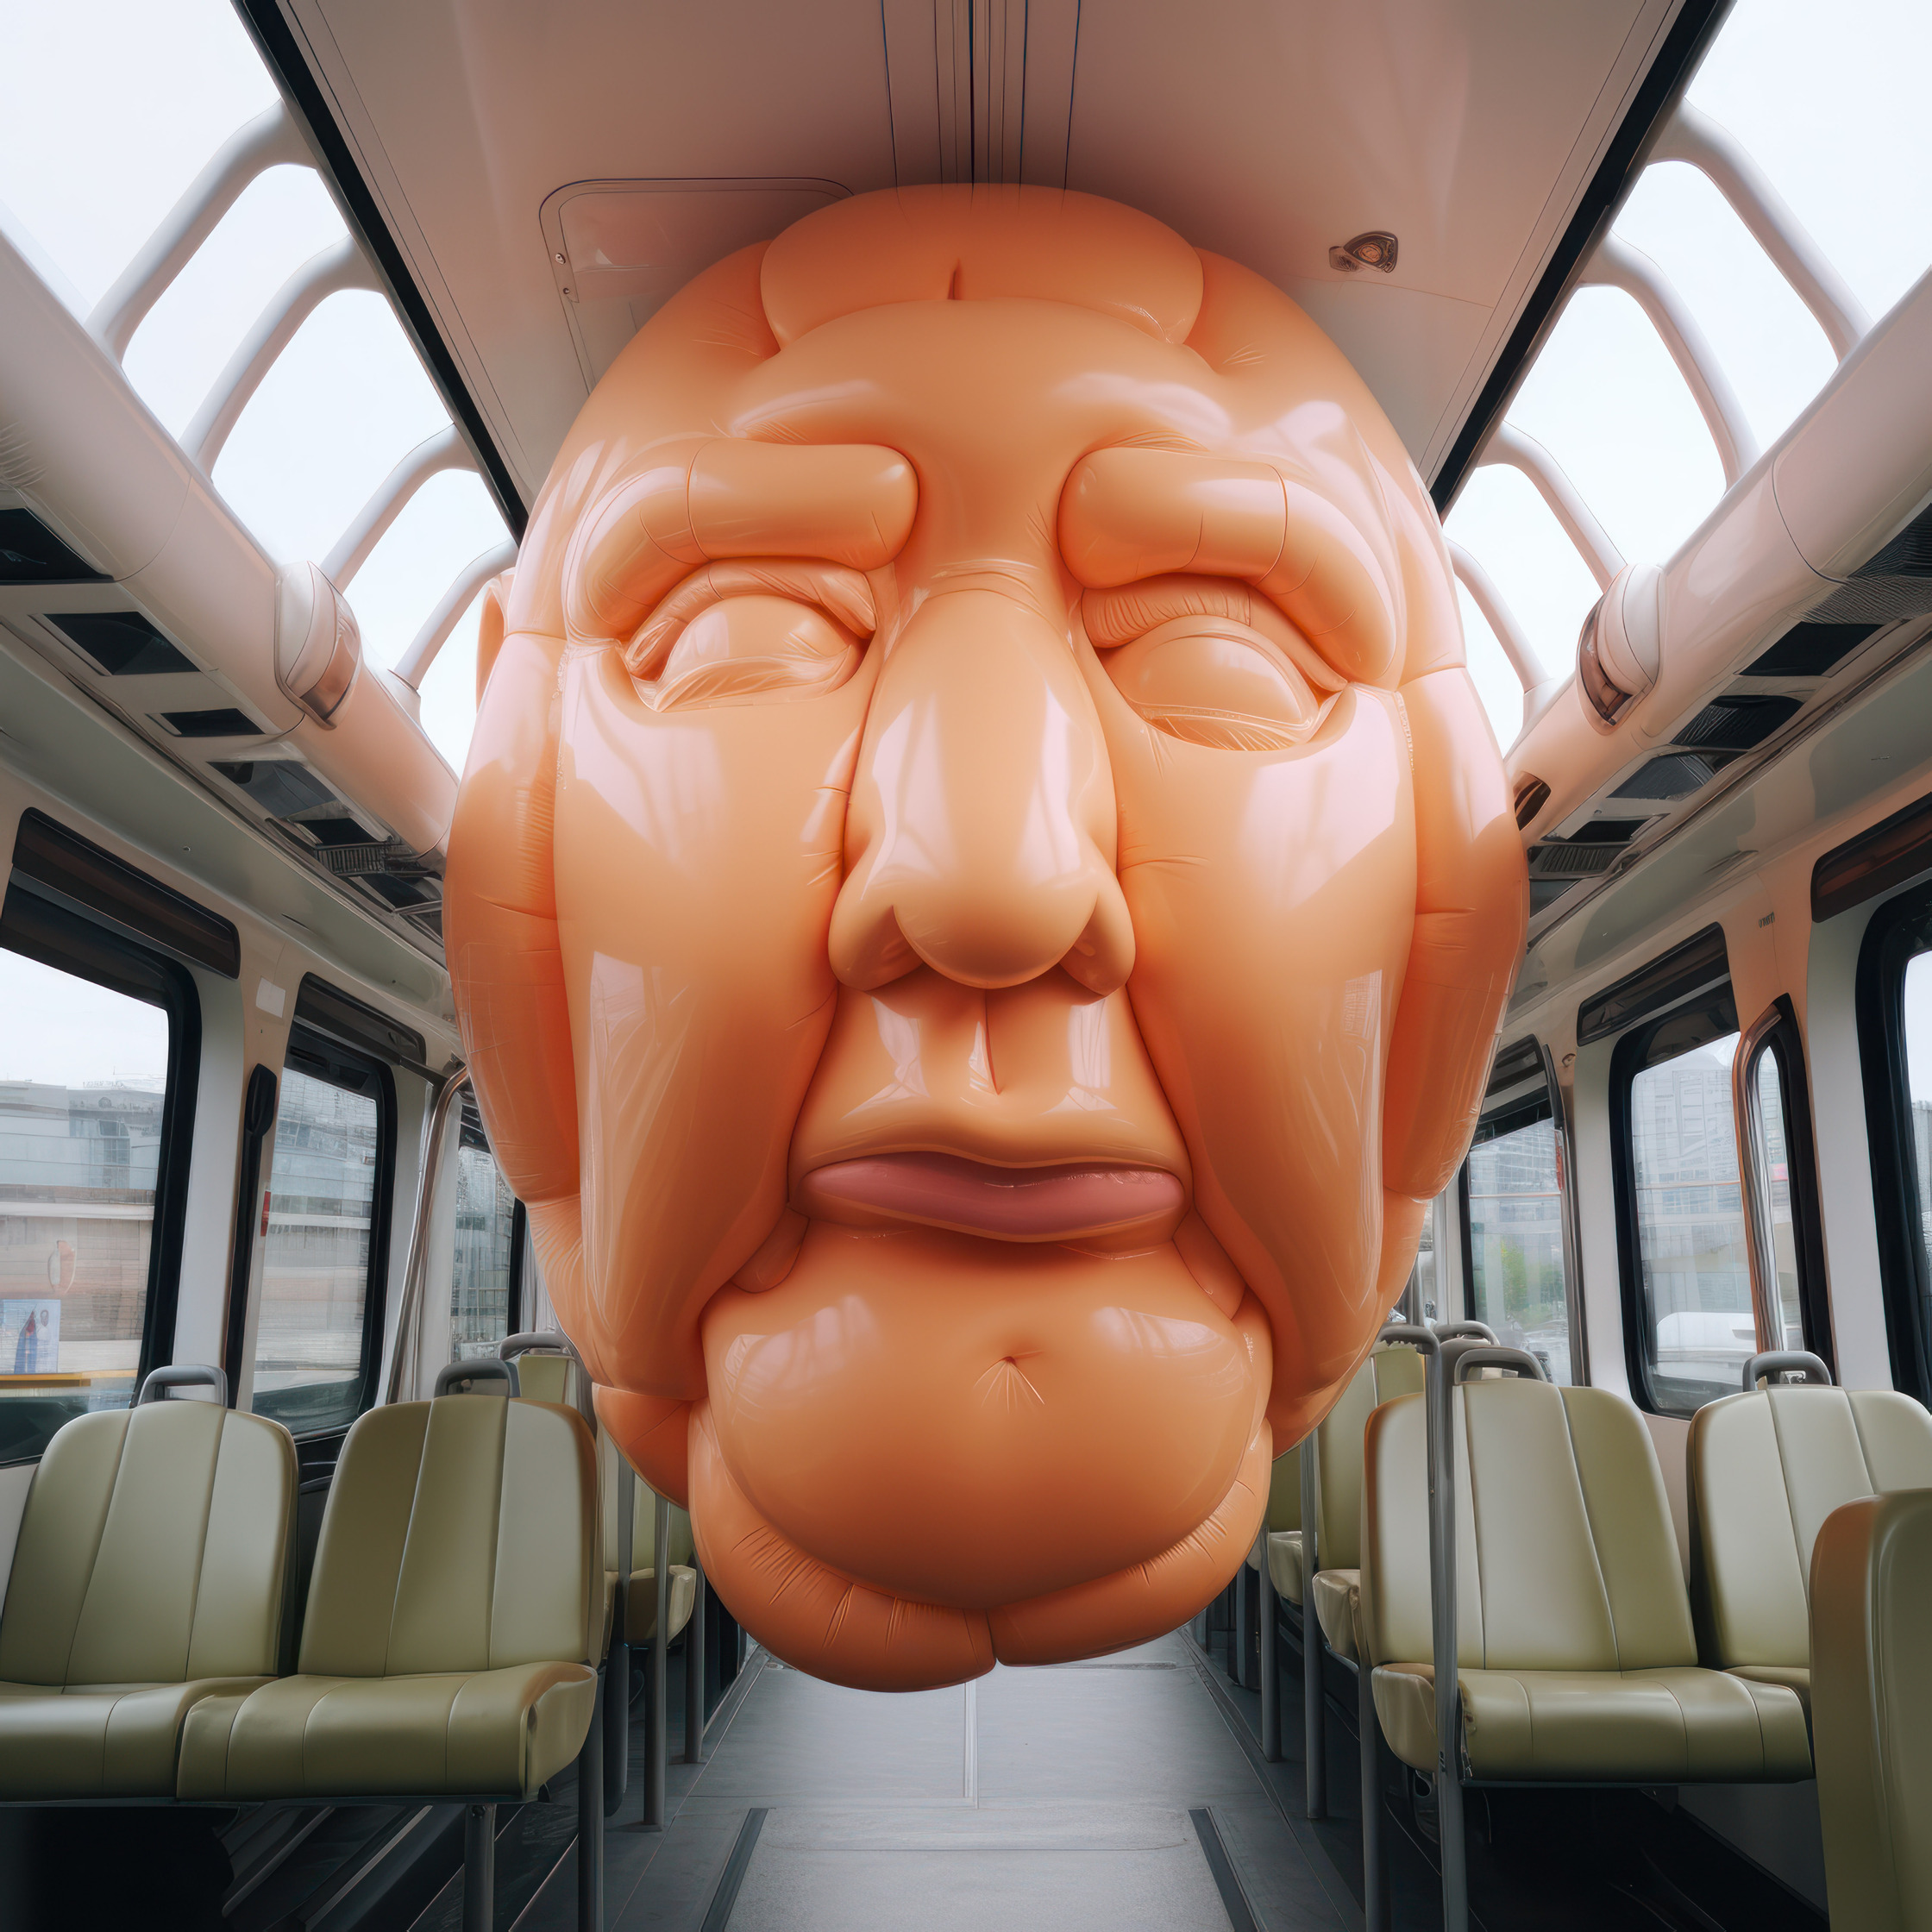 a balloon depicting a man's head in the middle of a bus